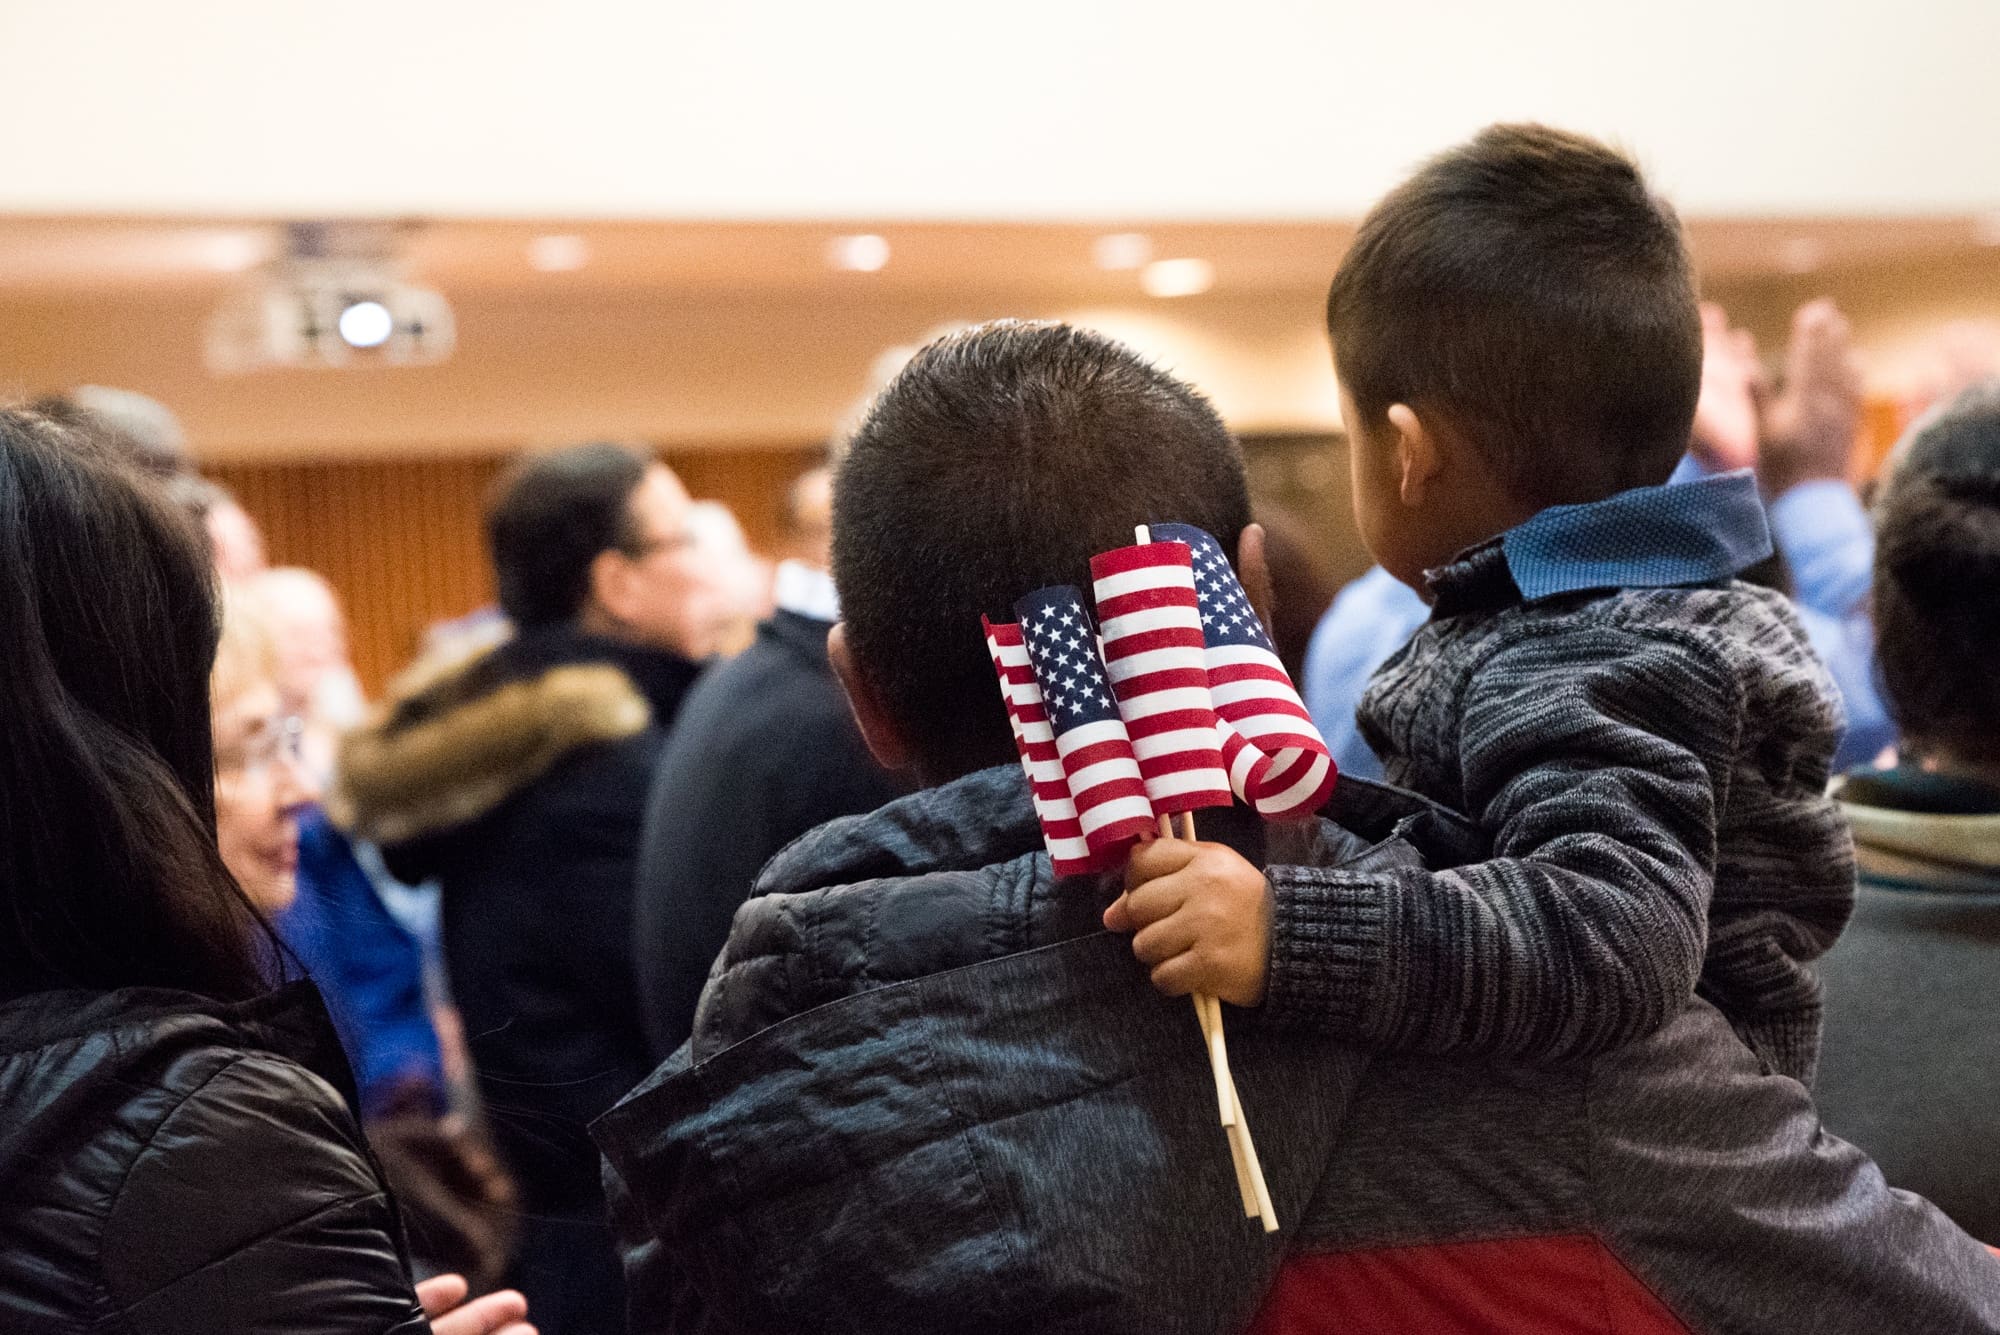 Naturalization ceremony, new citizens, at the International Institute of Minnesota